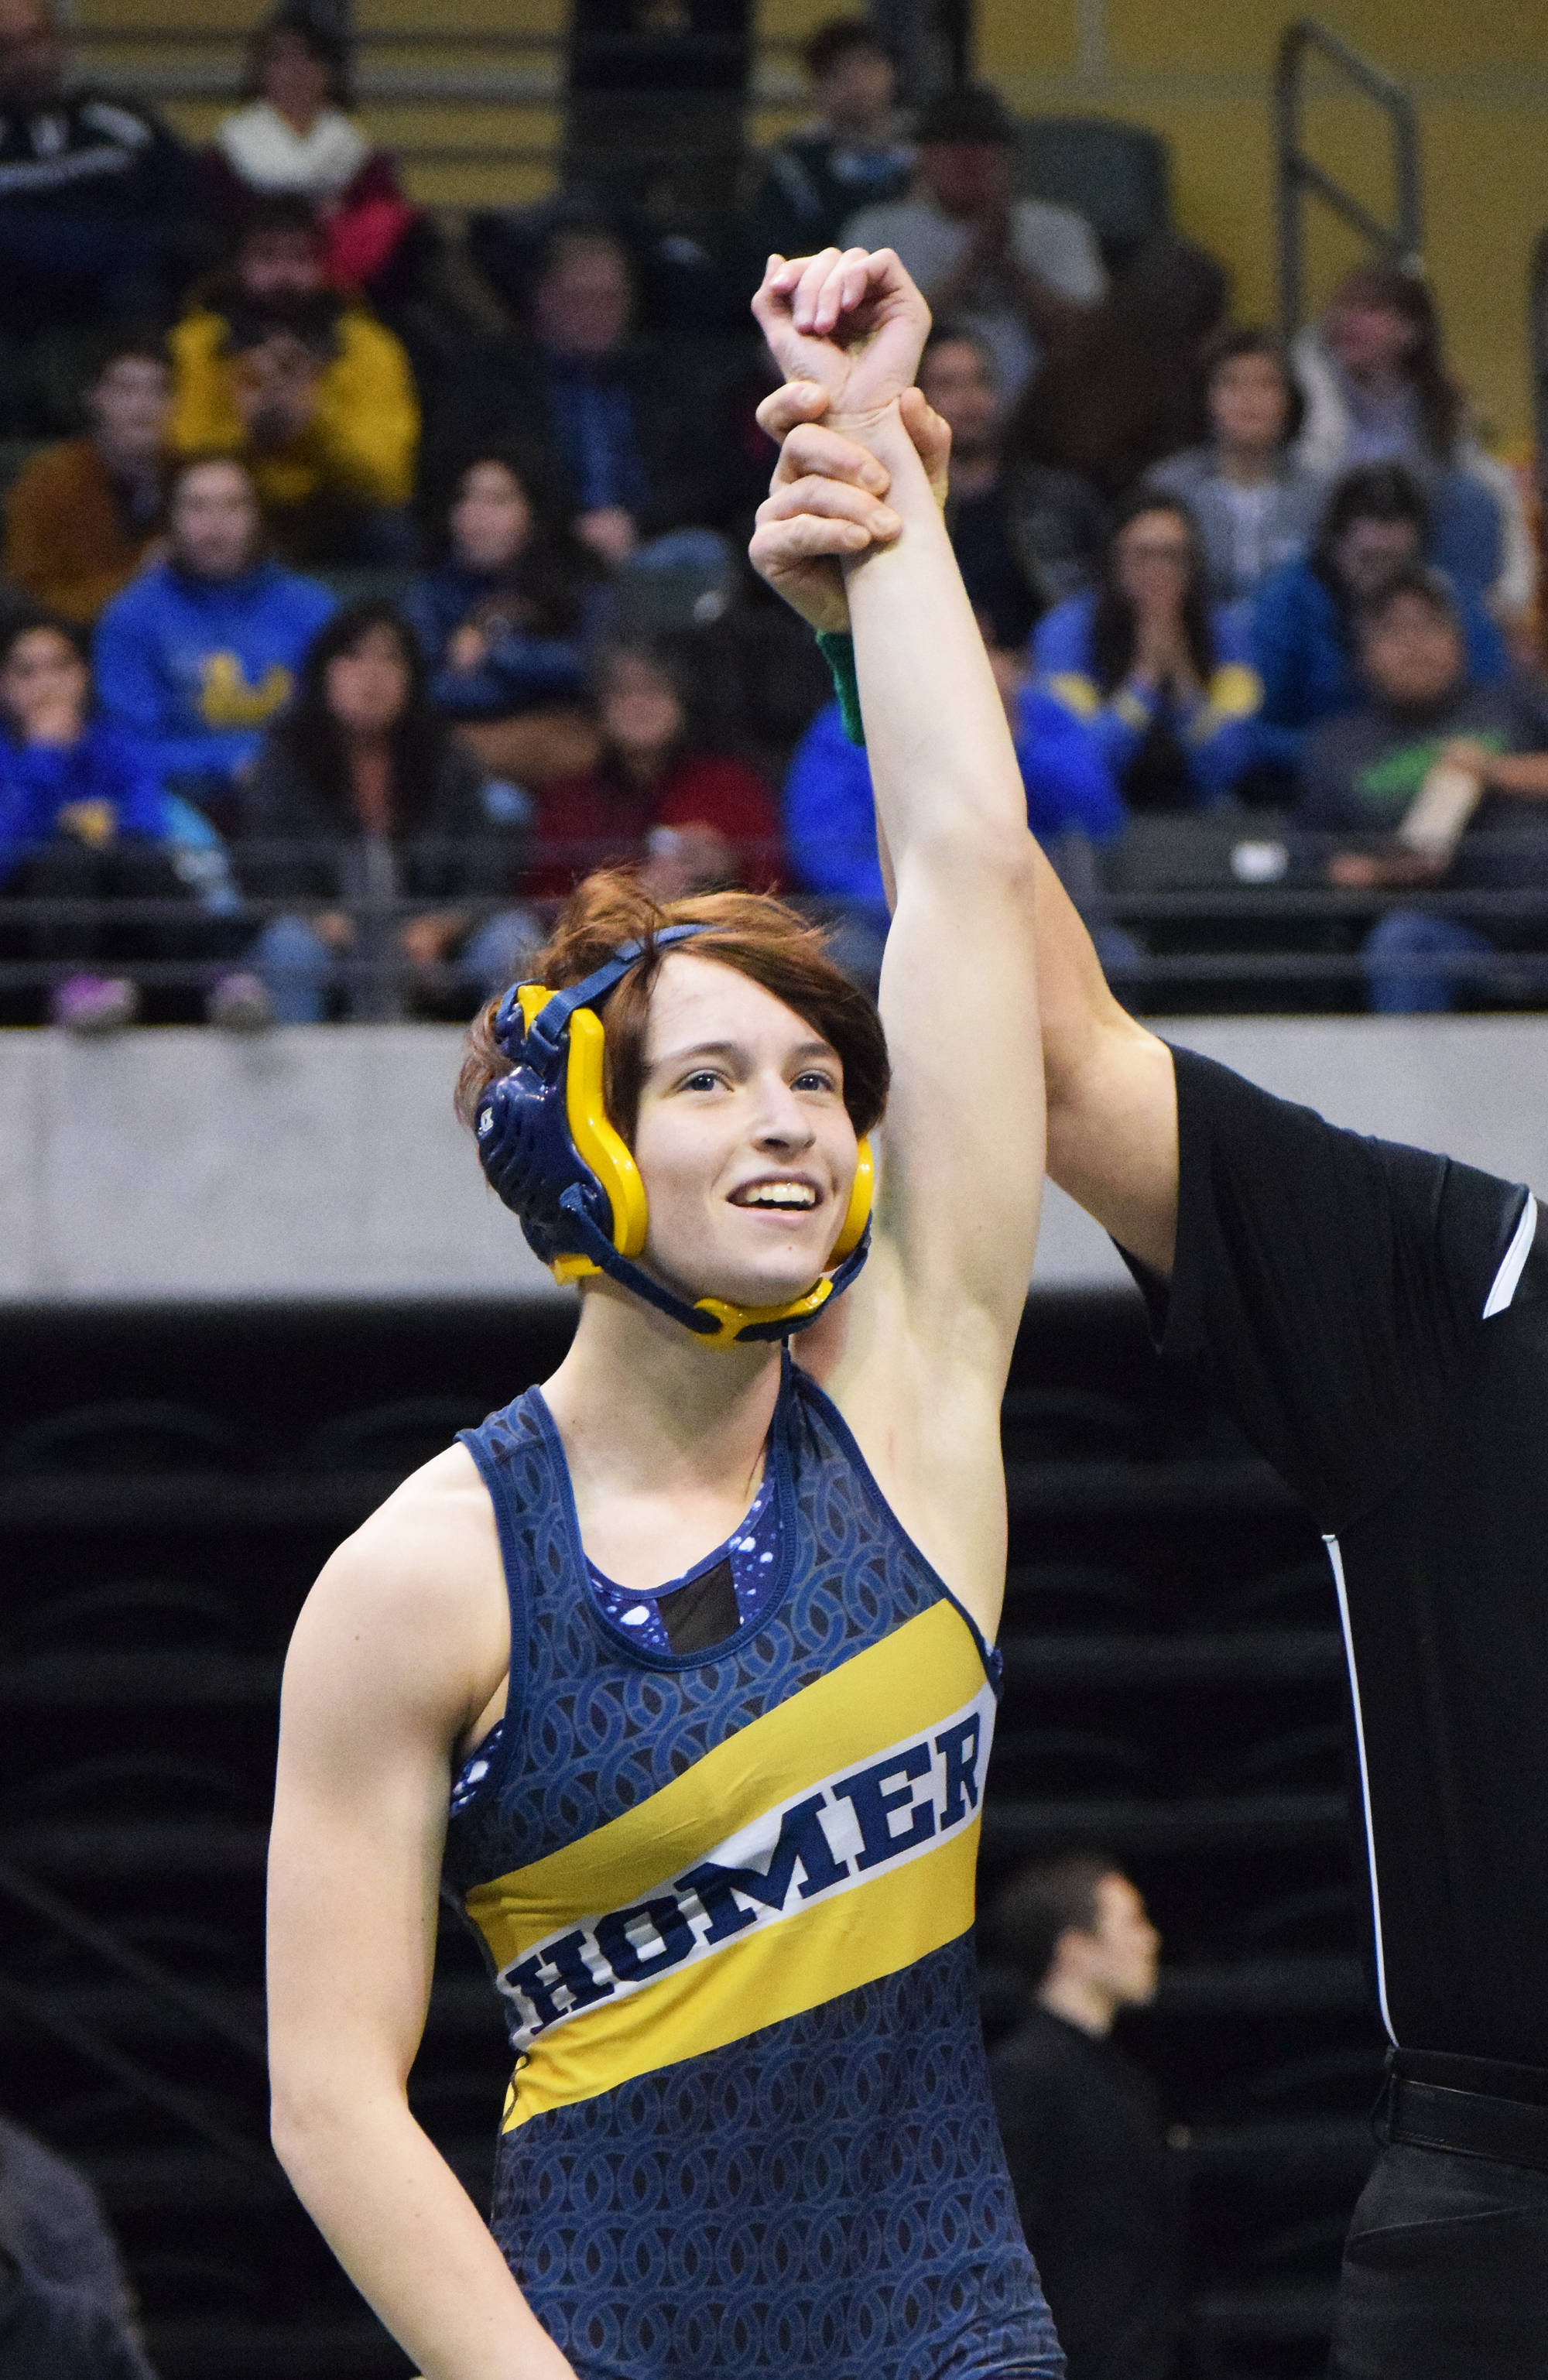 Homer senior Alex Moseley is crowned champion of the girls 120-pound division Saturday night at the Girls State Wrestling Championships at the Alaska Airlines Center in Anchorage. (Photo by Joey Klecka/Peninsula Clarion)